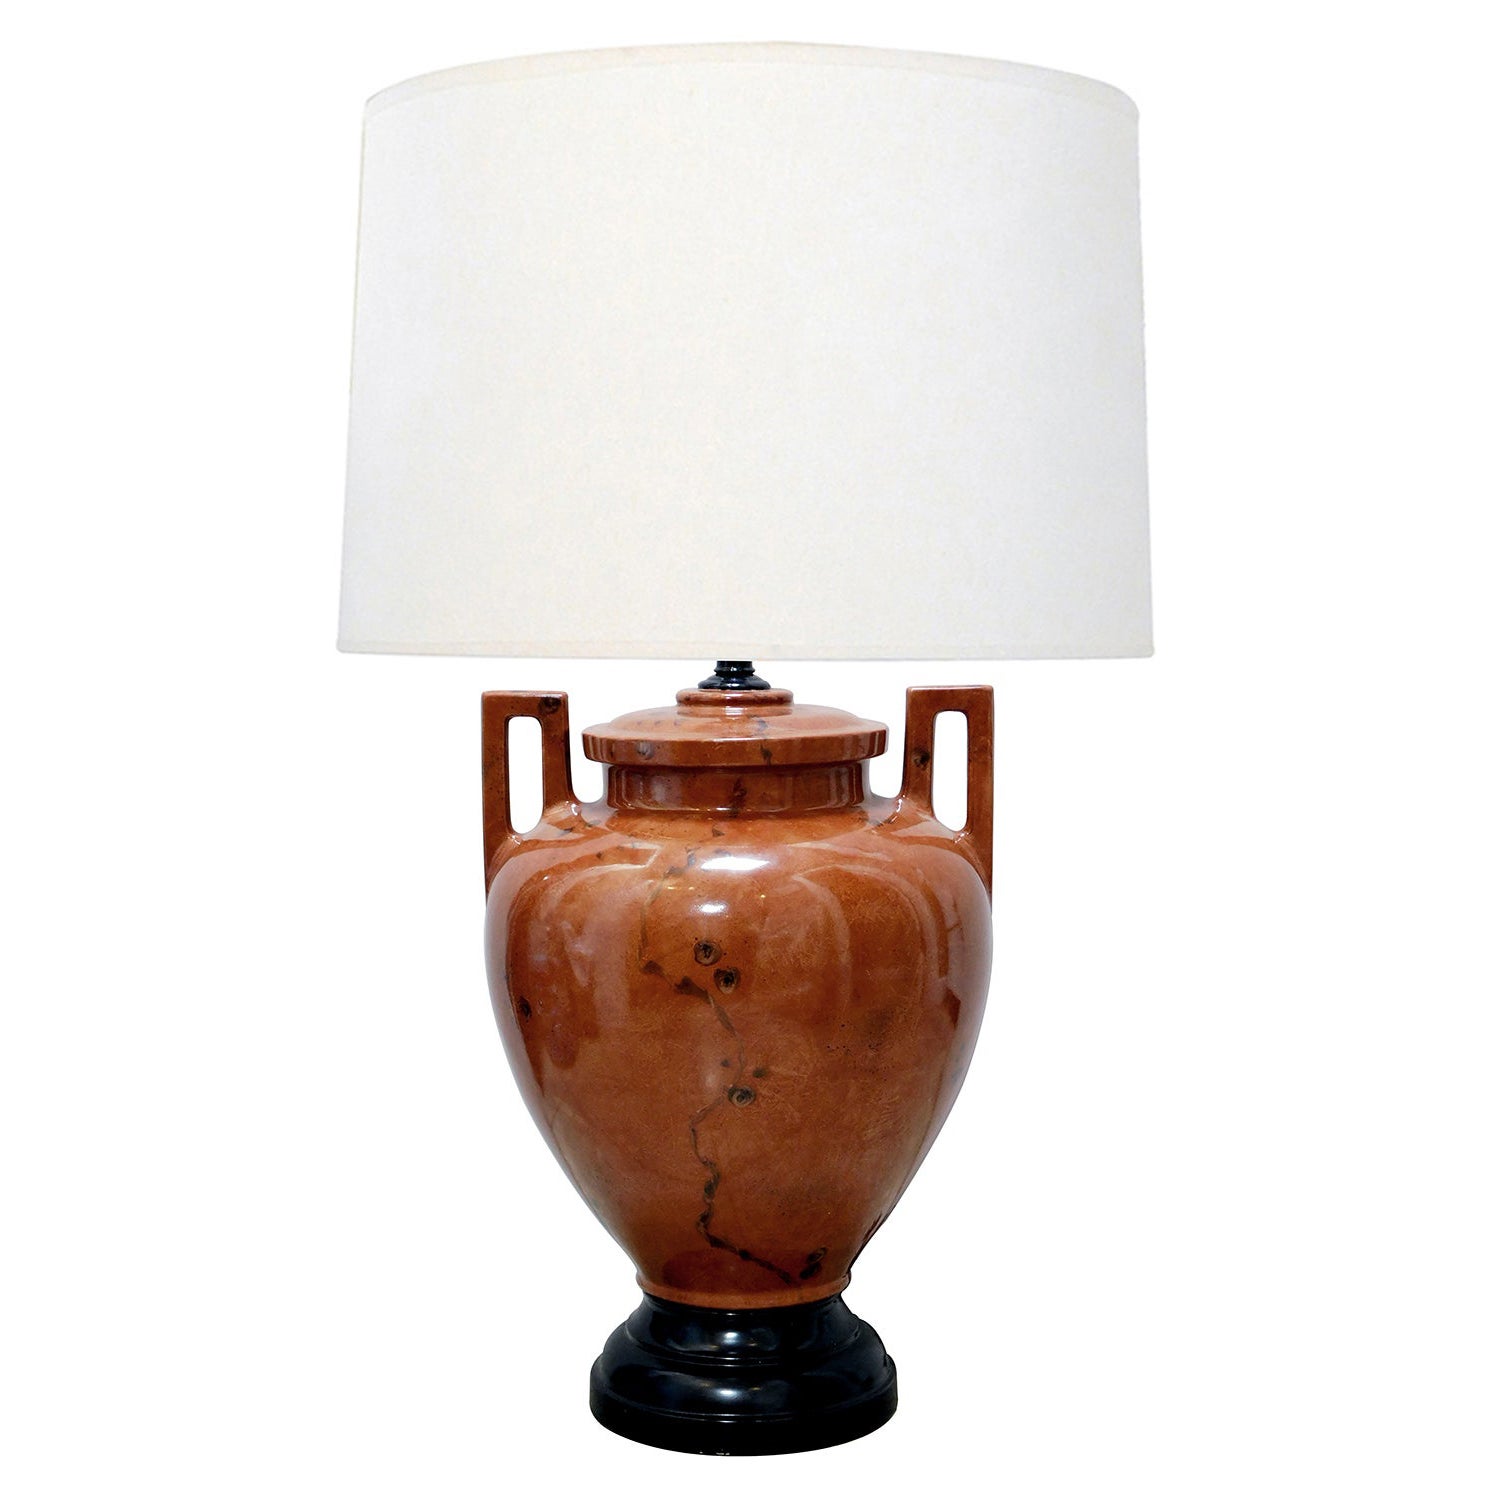 Large-Scaled Faux-Burl Ceramic Double-Handled Urn-Form Lamp